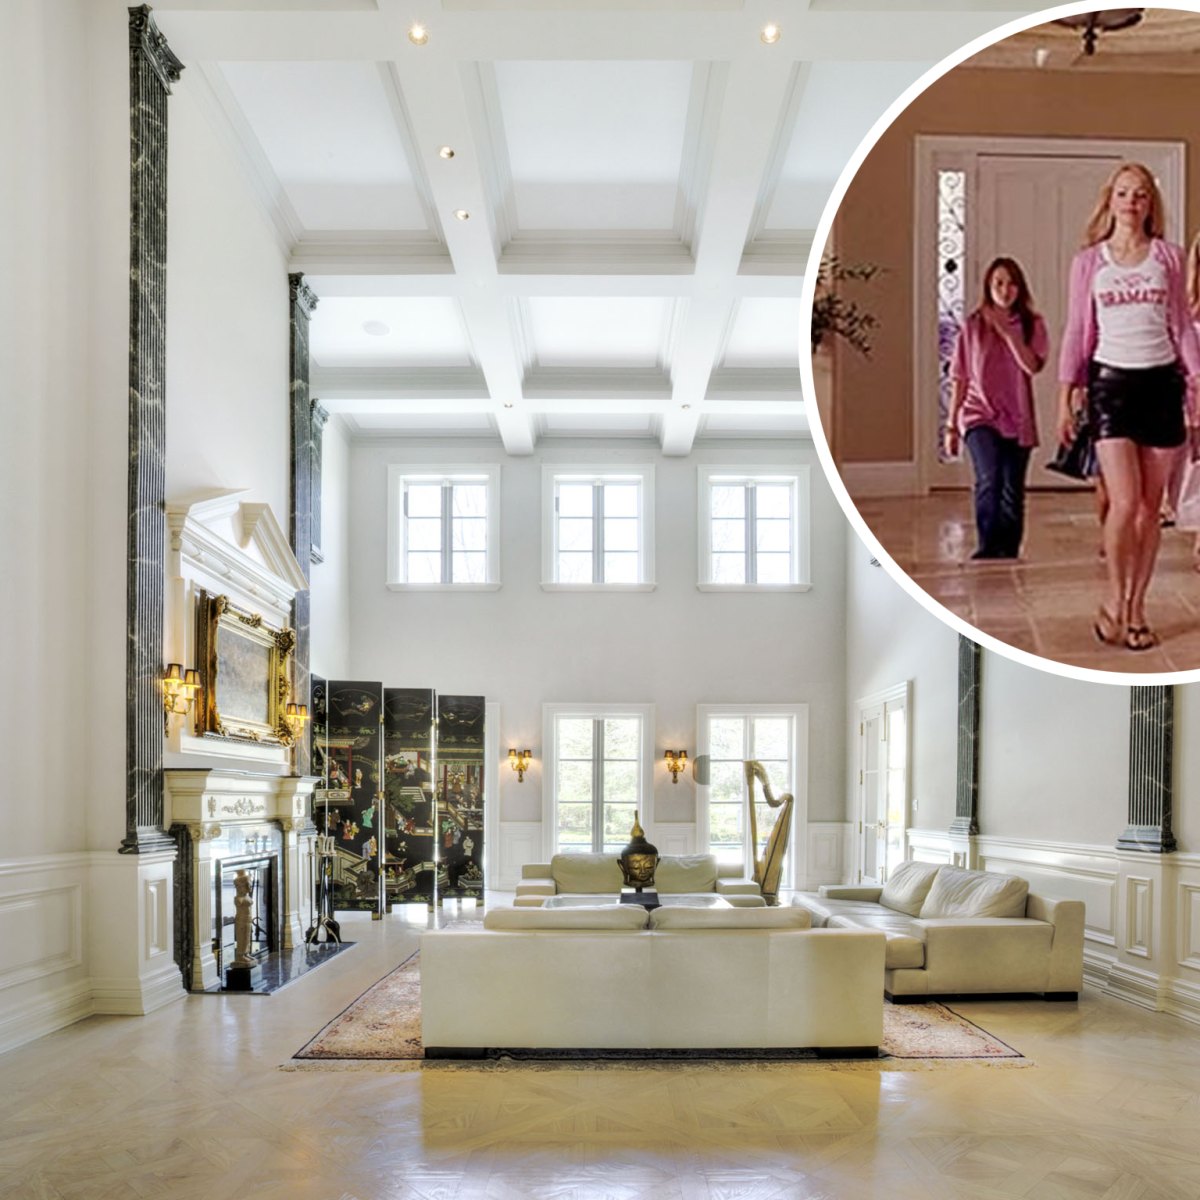 Visit Regina George's House from 'Mean Girls' — the FilmTripper